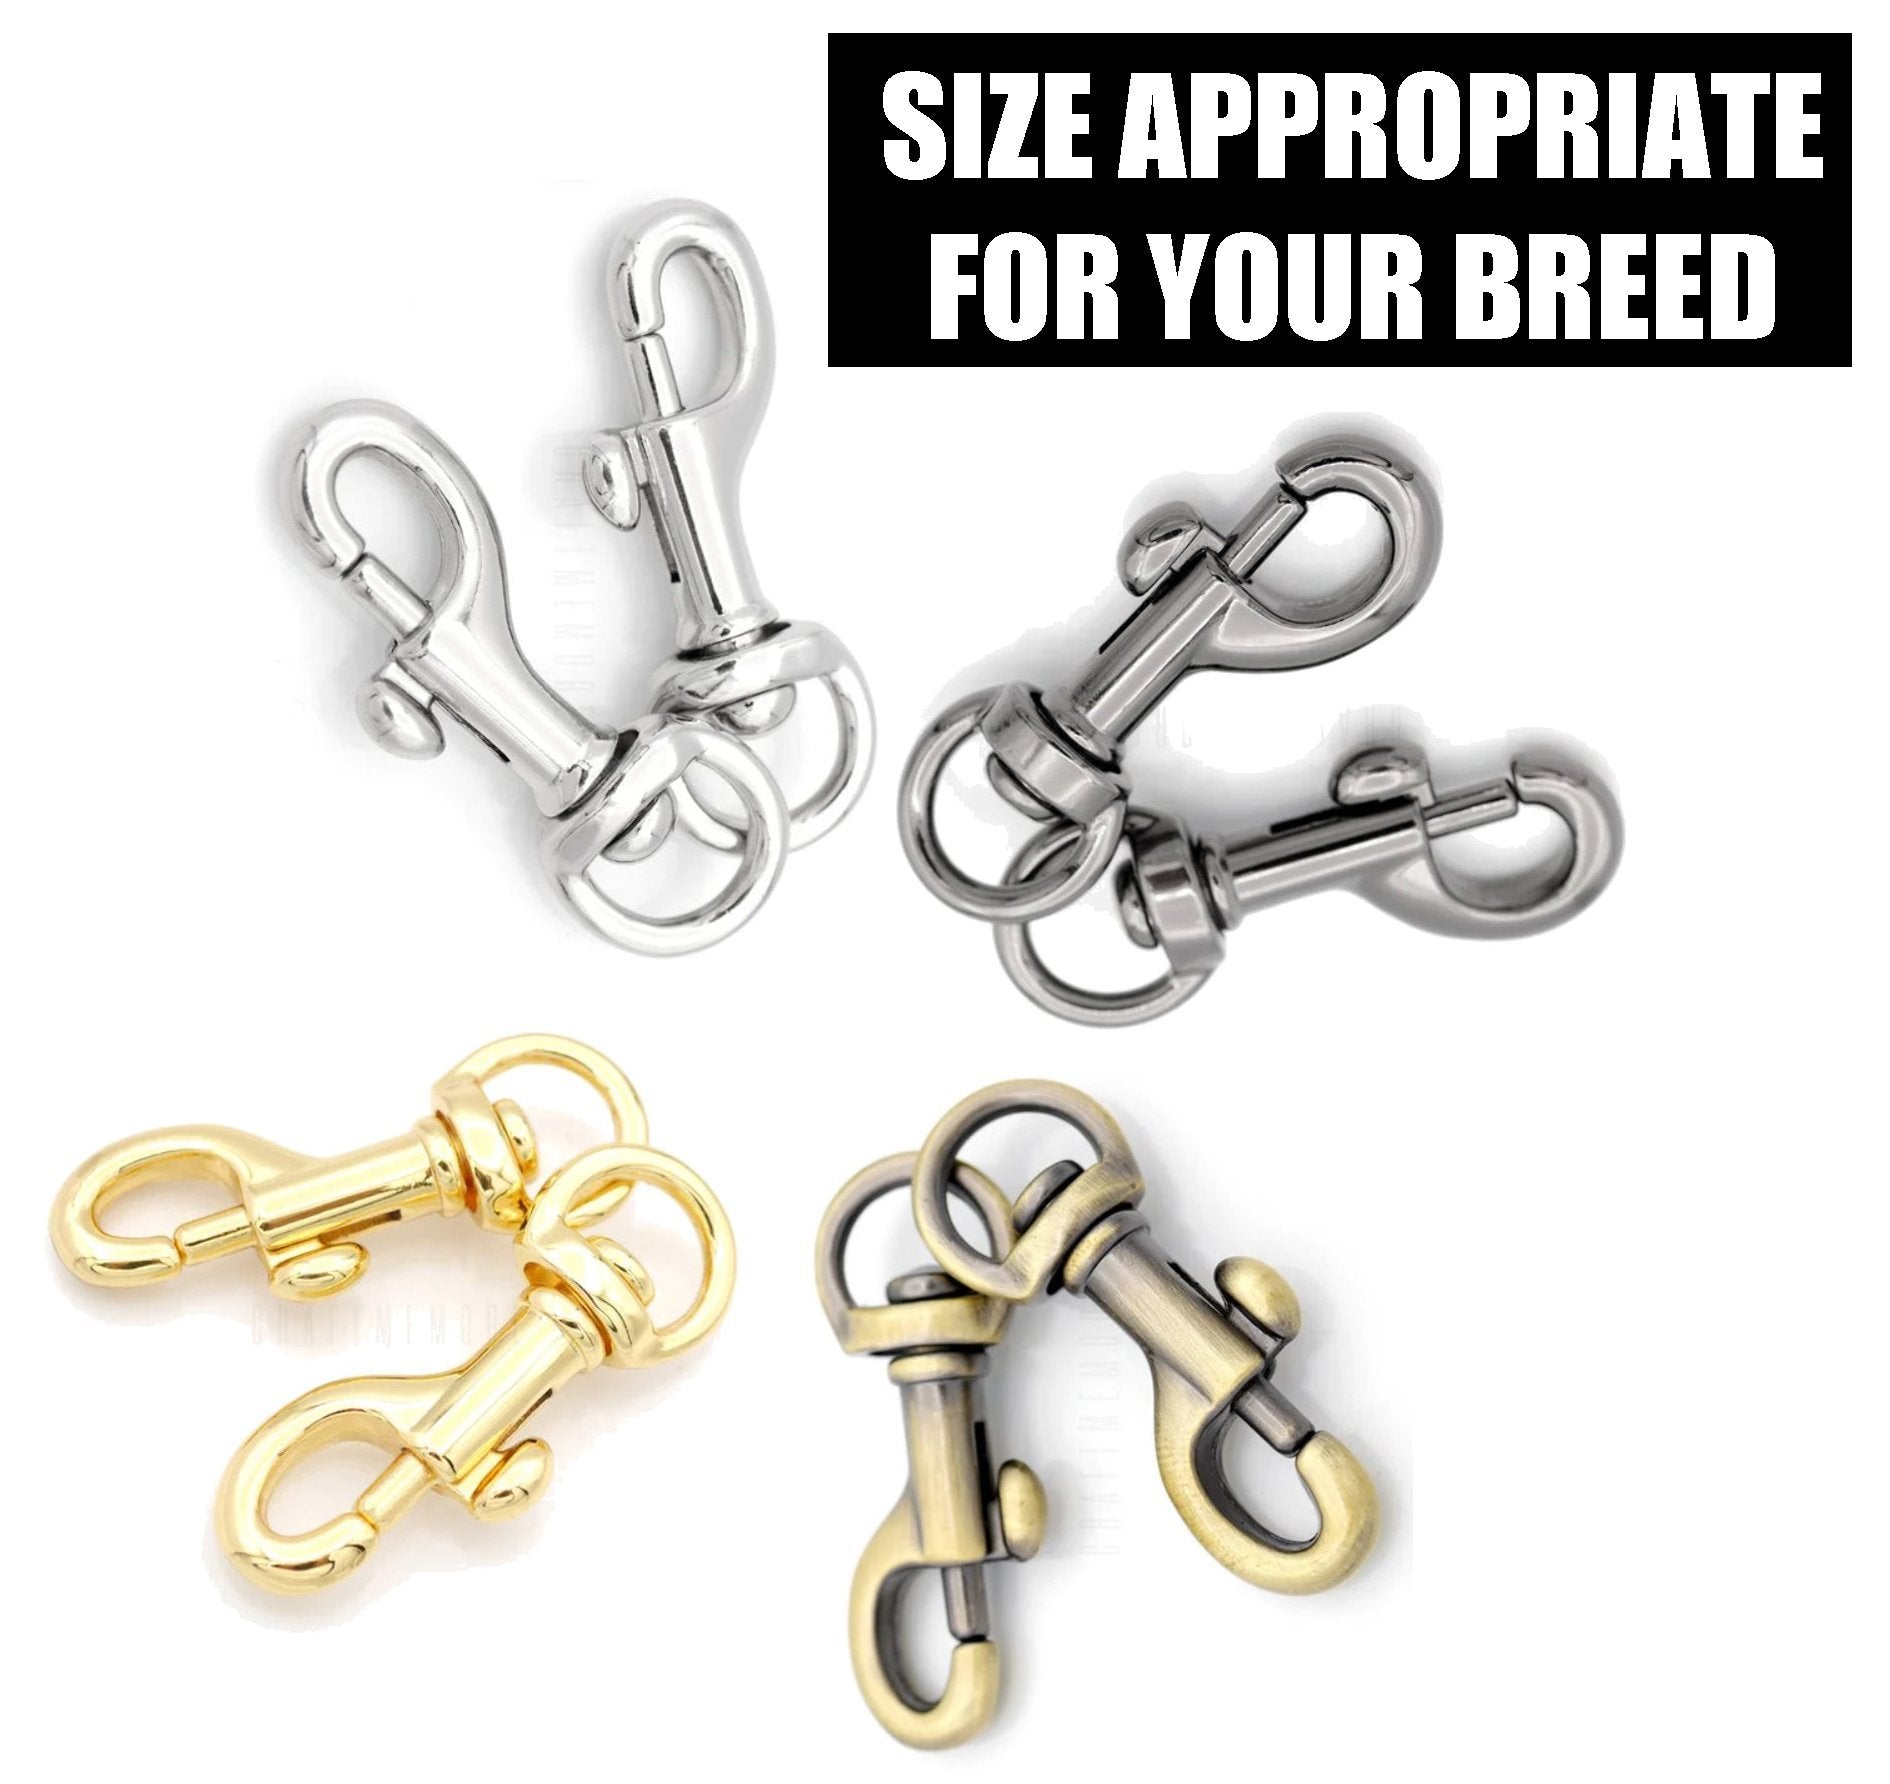 Options for Custom Order Leather Show Lead - Champion Show Leads